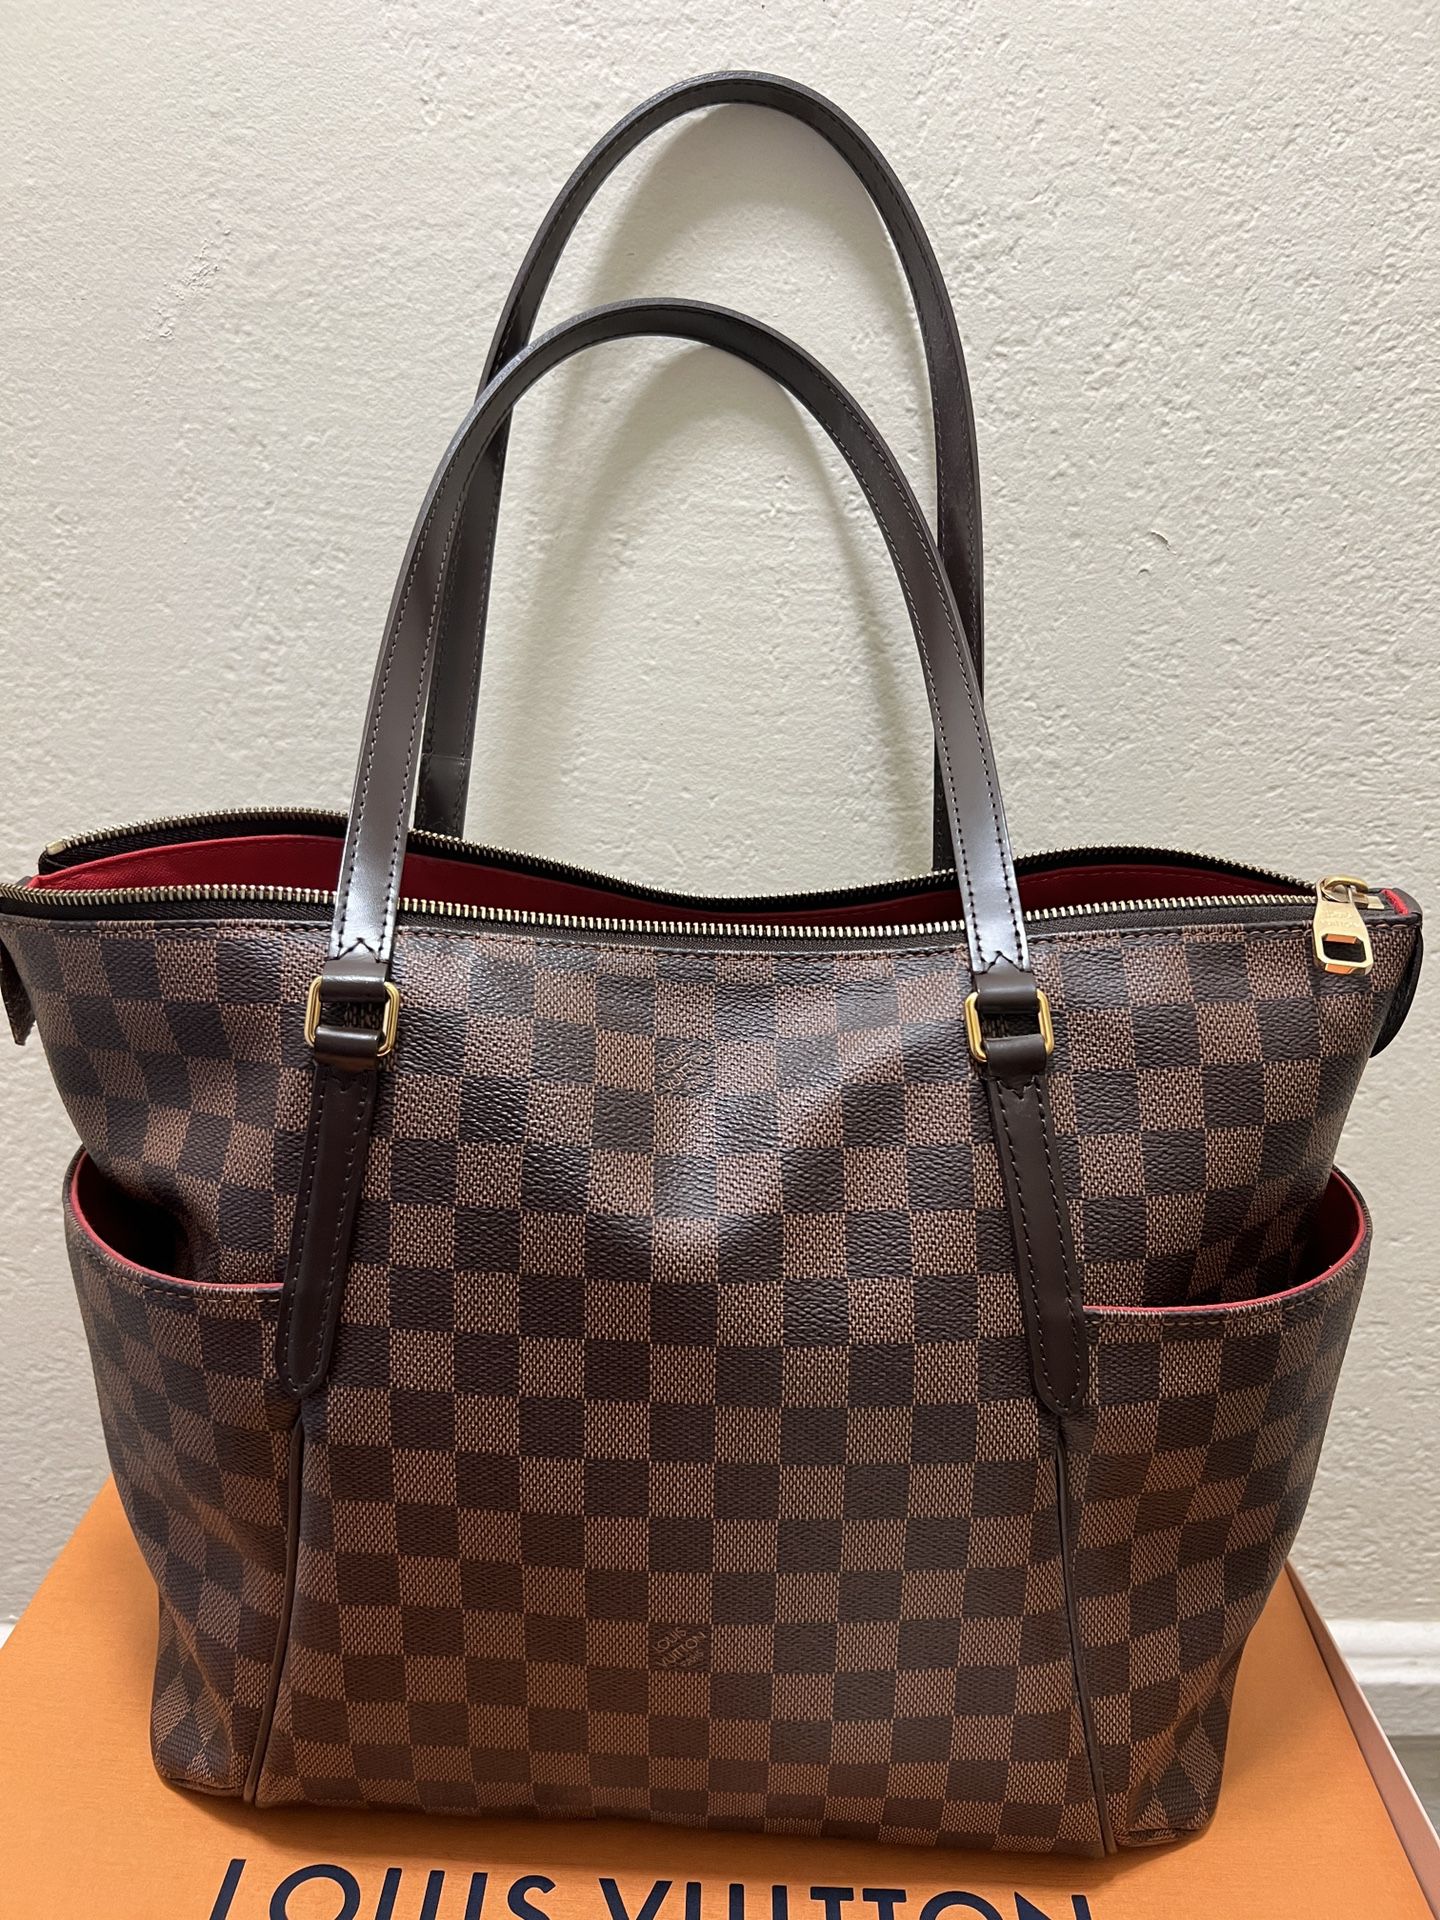 Authentic LV Bag Authenticated By TRR But Rejected For Excessive Wear for  Sale in Mountain View, CA - OfferUp